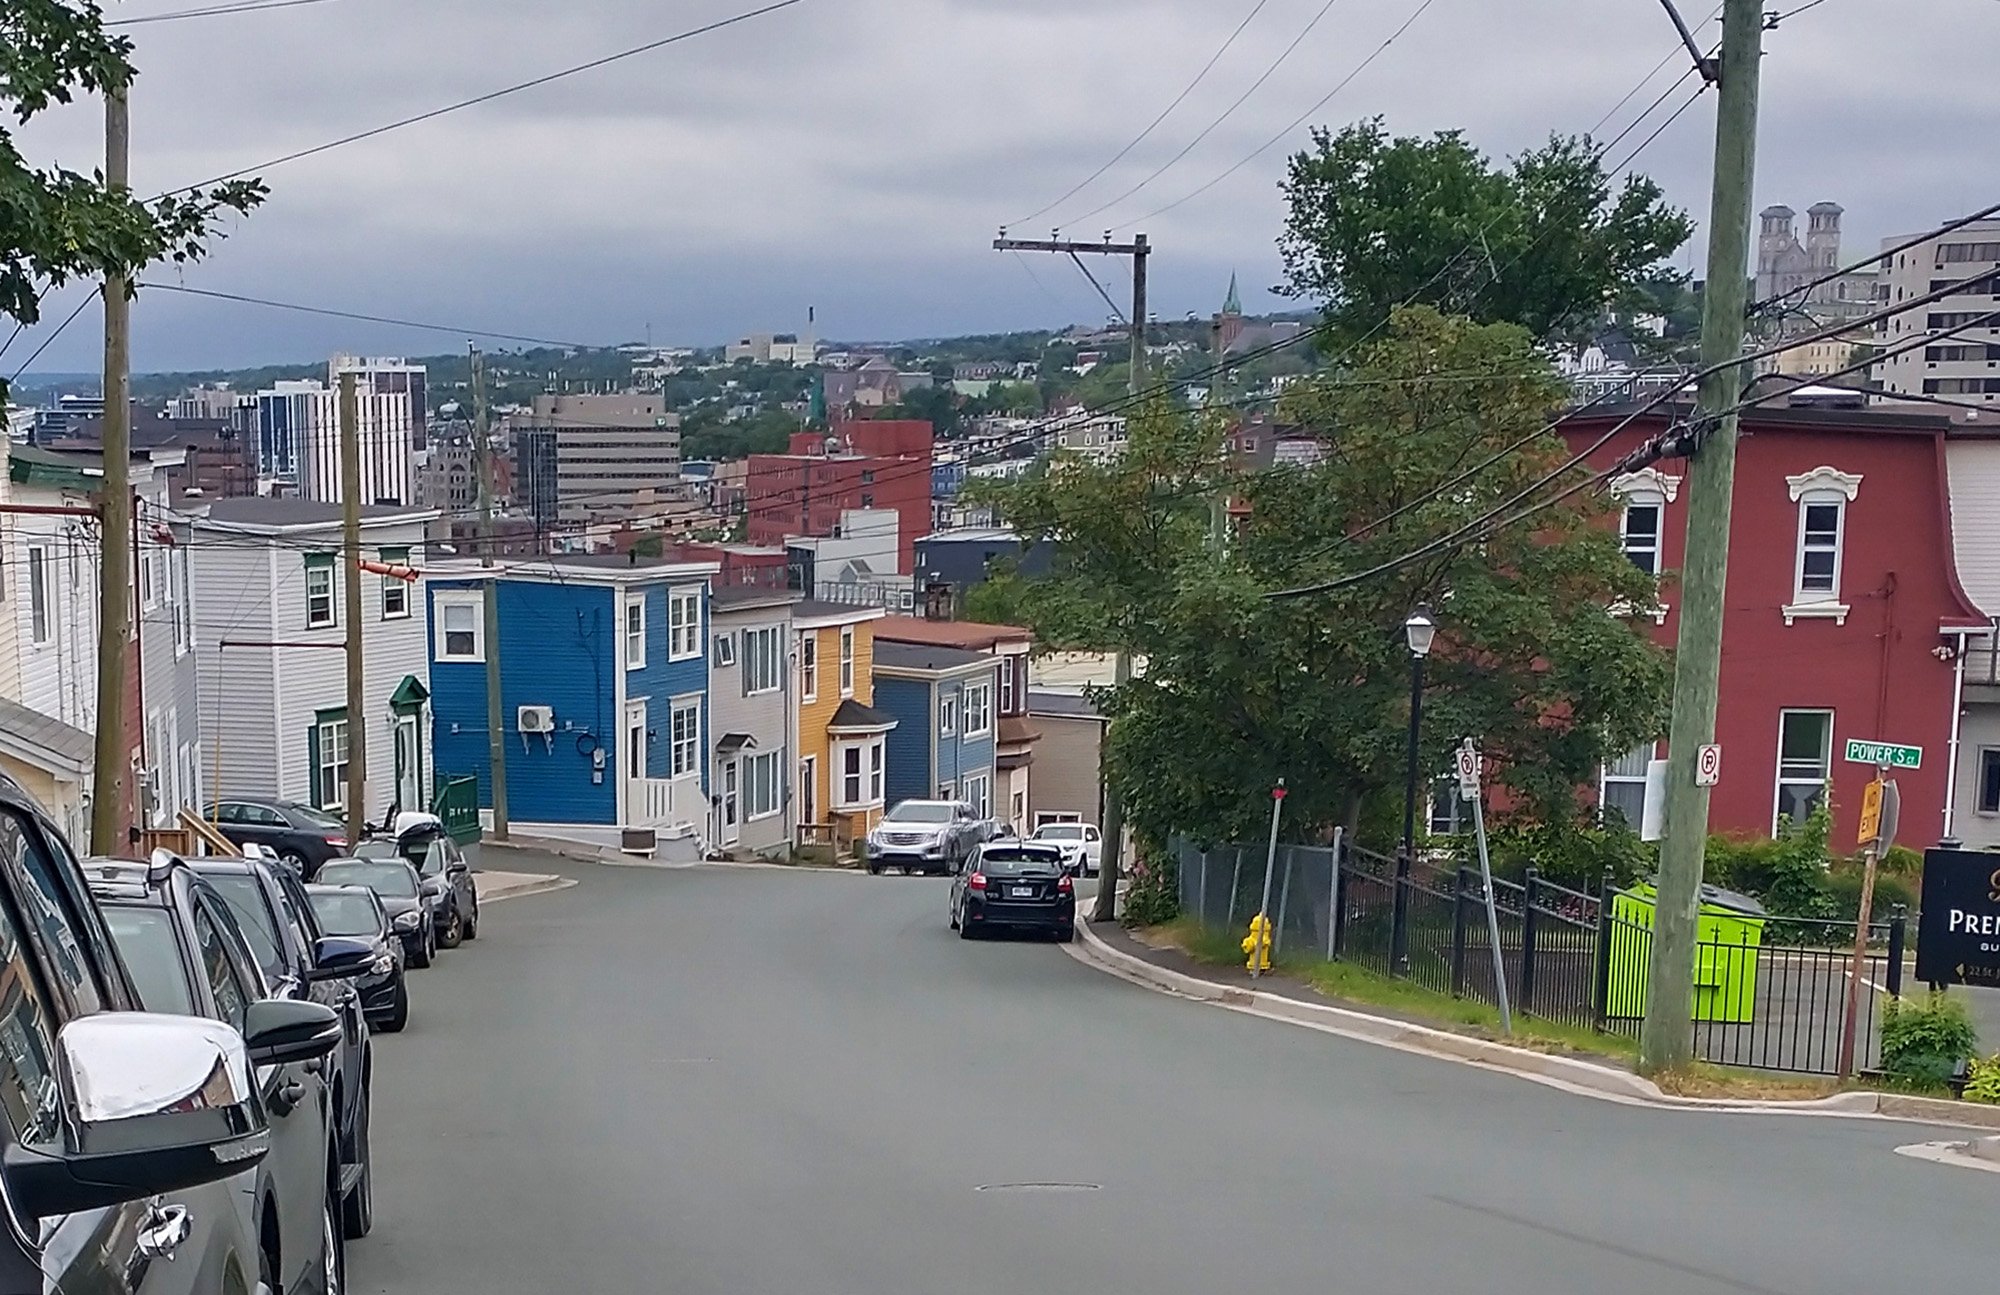 Back to downtown St John's.